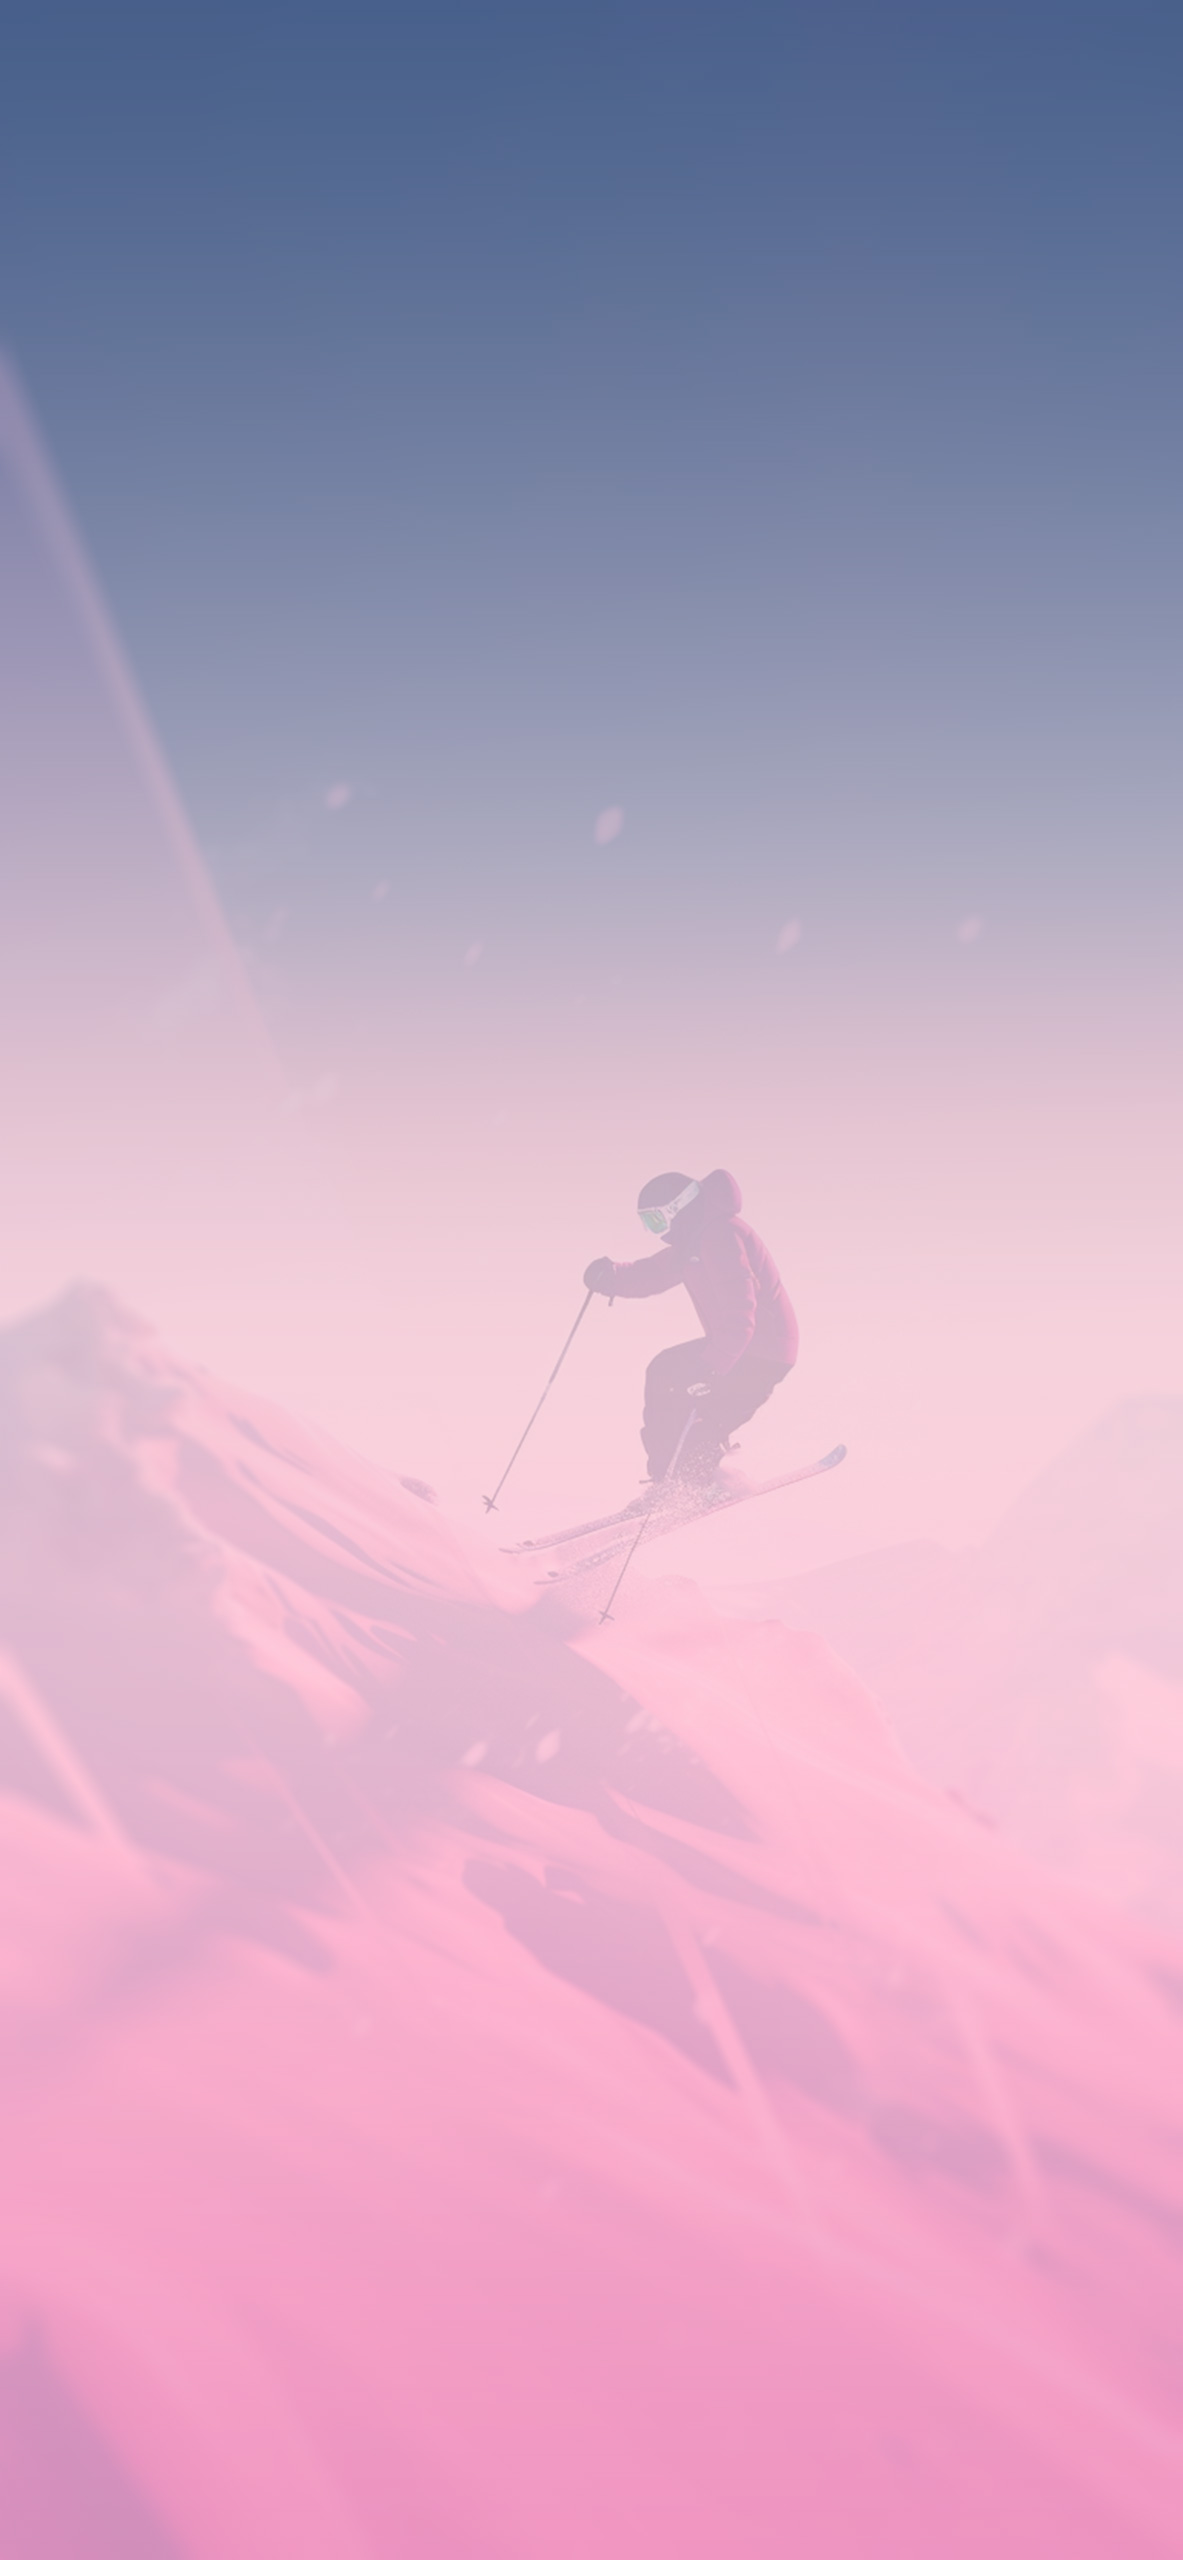 skiing down the mountain background